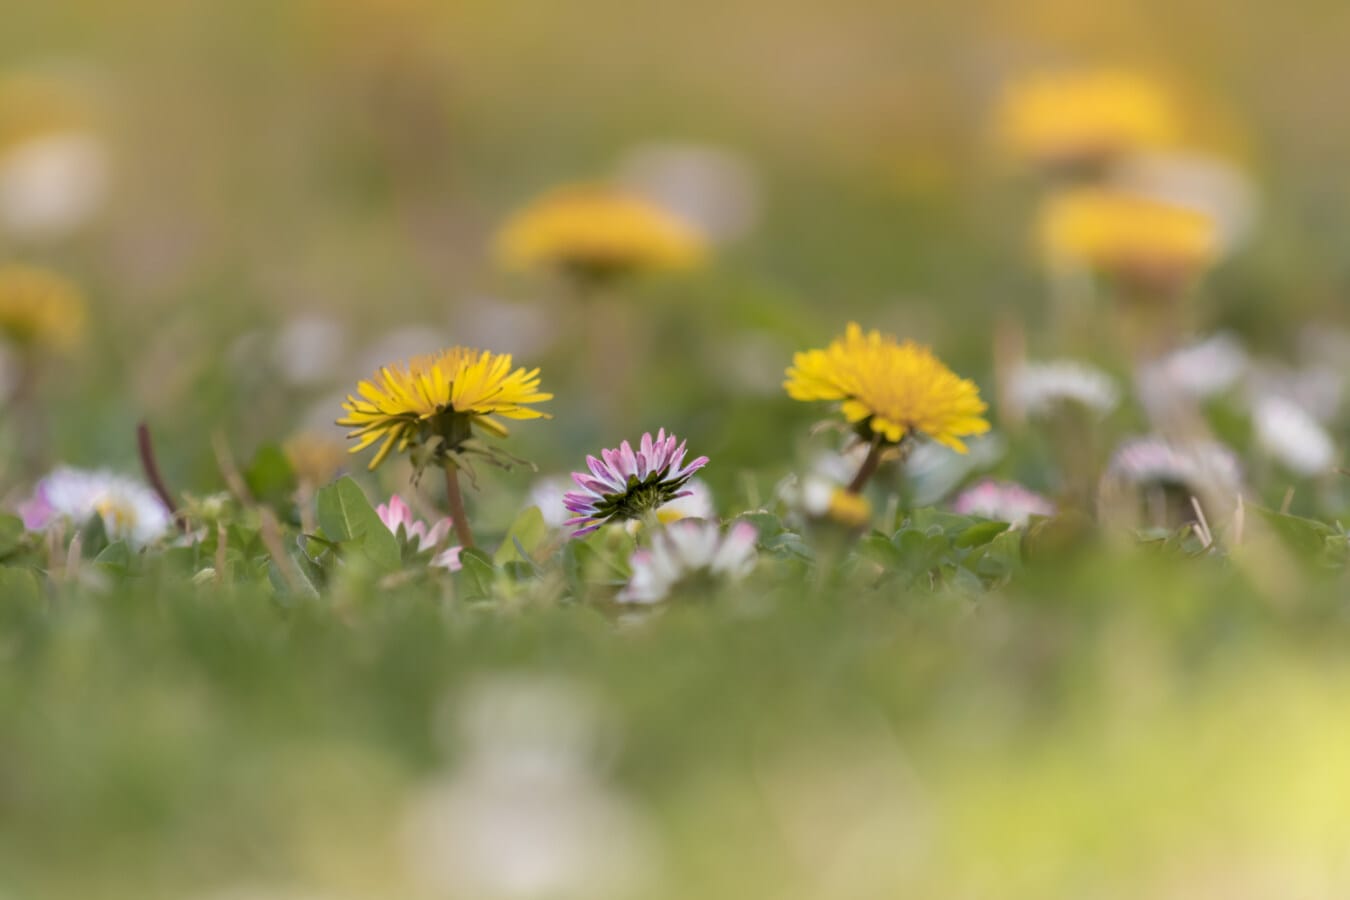 daisy, daisies, lawn, close-up, focus, herb, dandelion, yellow, plant, grass